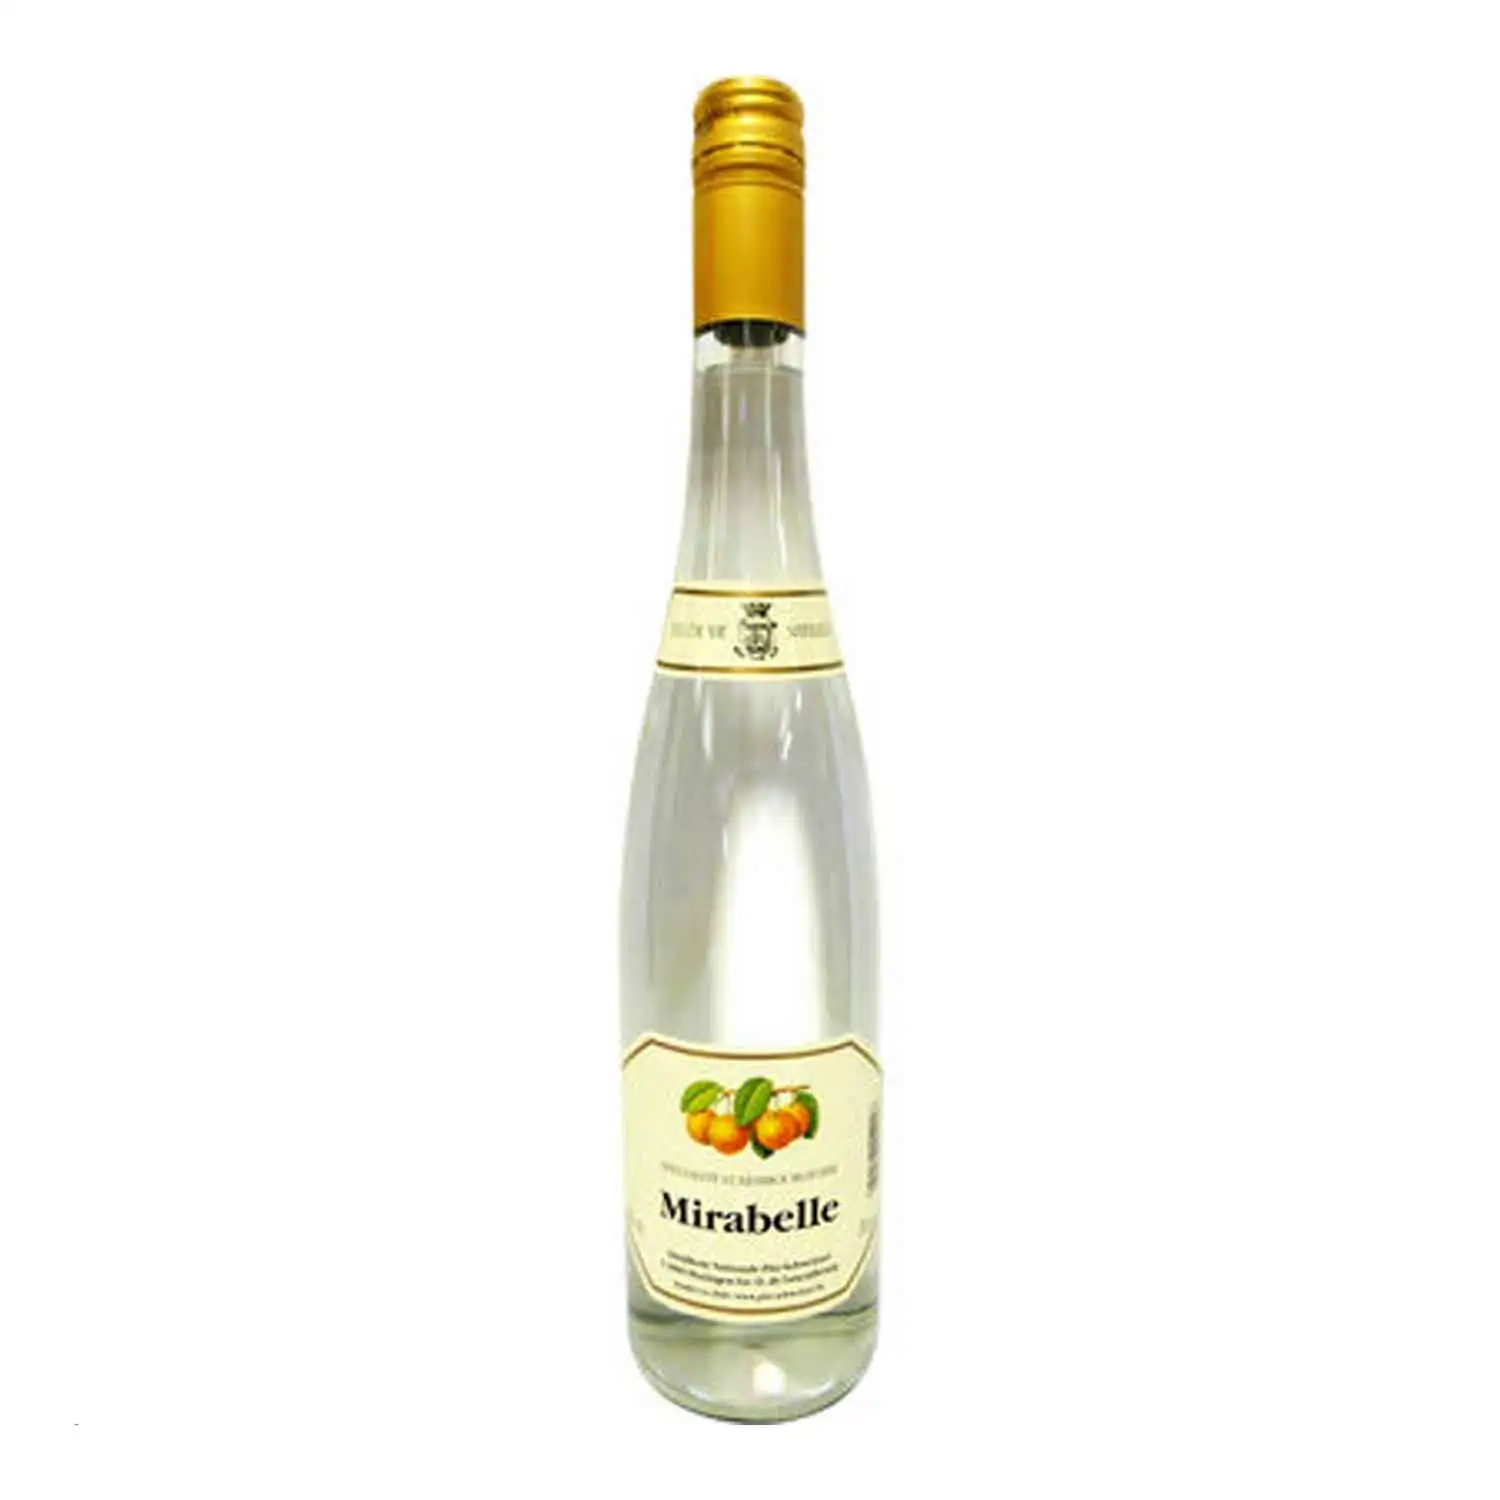 Mirabelle 70cl Alc 40% - Buy at Real Tobacco